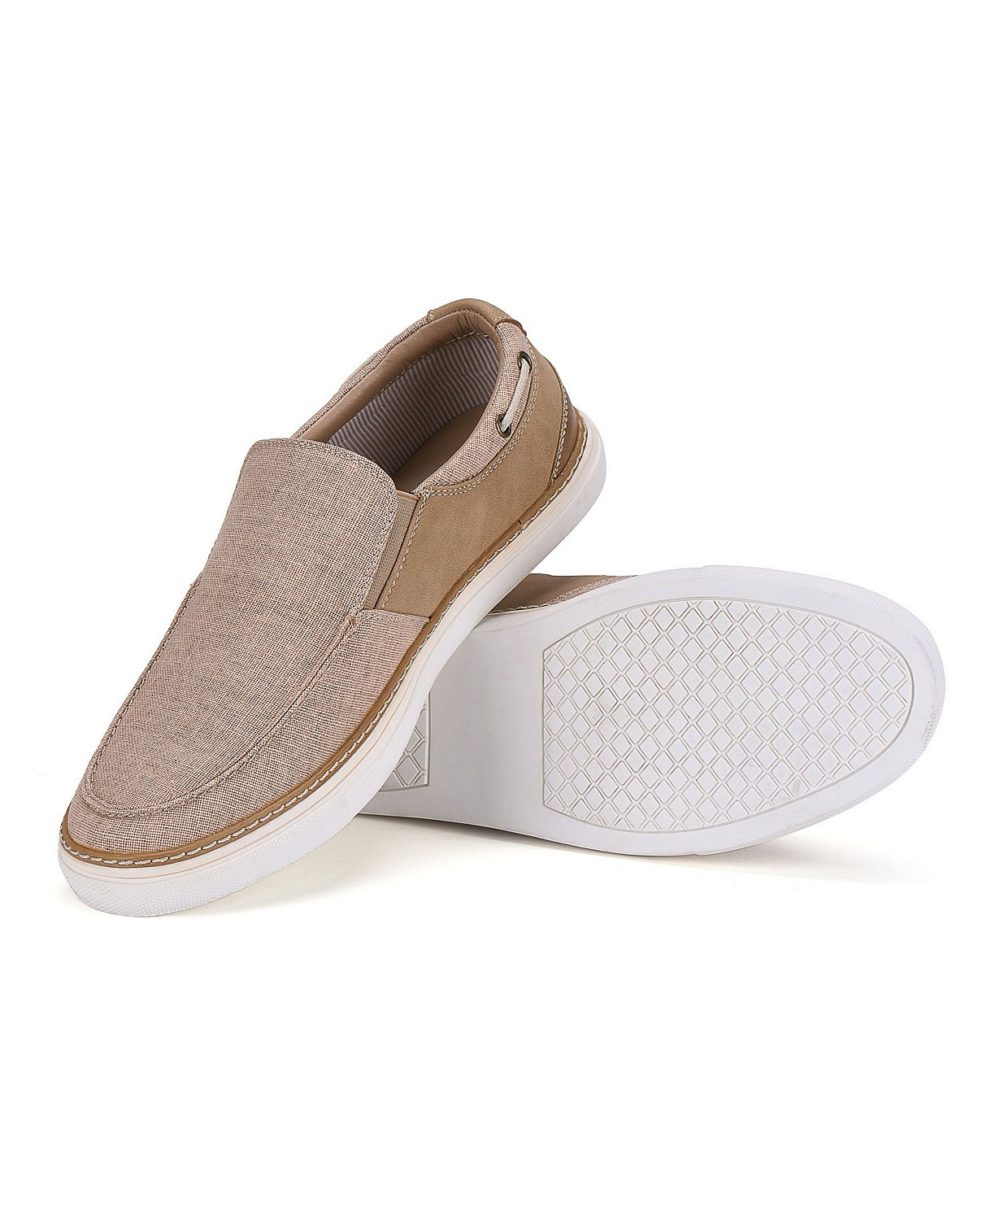 woocommerce-673321-2209615.cloudwaysapps.com-gallery-seven-mens-brown-canvas-slip-on-boat-shoes